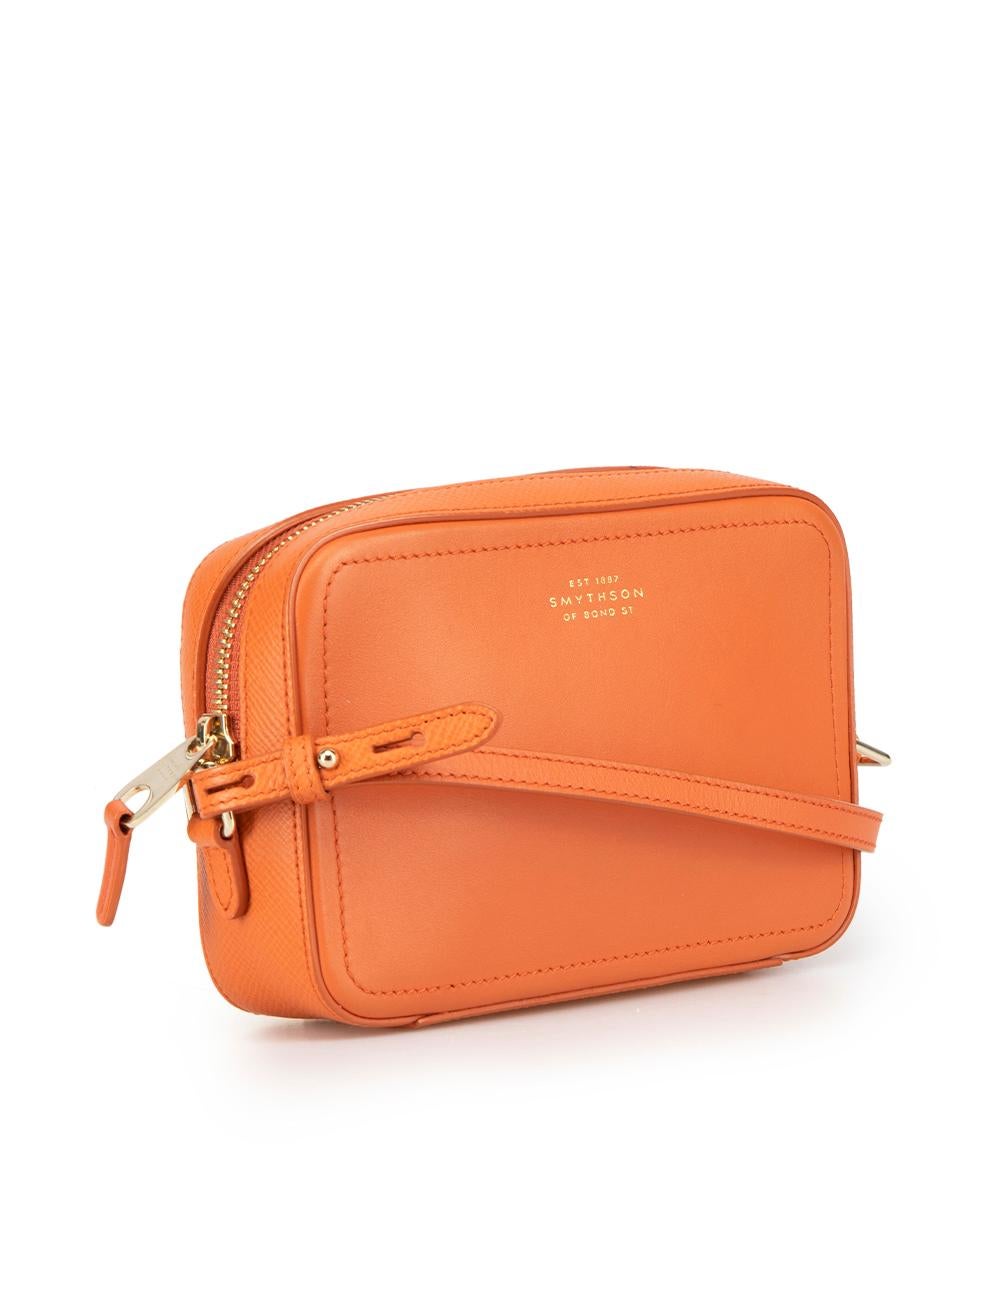 CONDITION is Very good. Hardly any visible wear to handbag is evident. A dark scuff on the piping near the zip on this used Smythson designer resale item.

Details
Orange
Leather
Mini crossbody bag
Gold tone hardware
1x Adjustable strap
1x Main